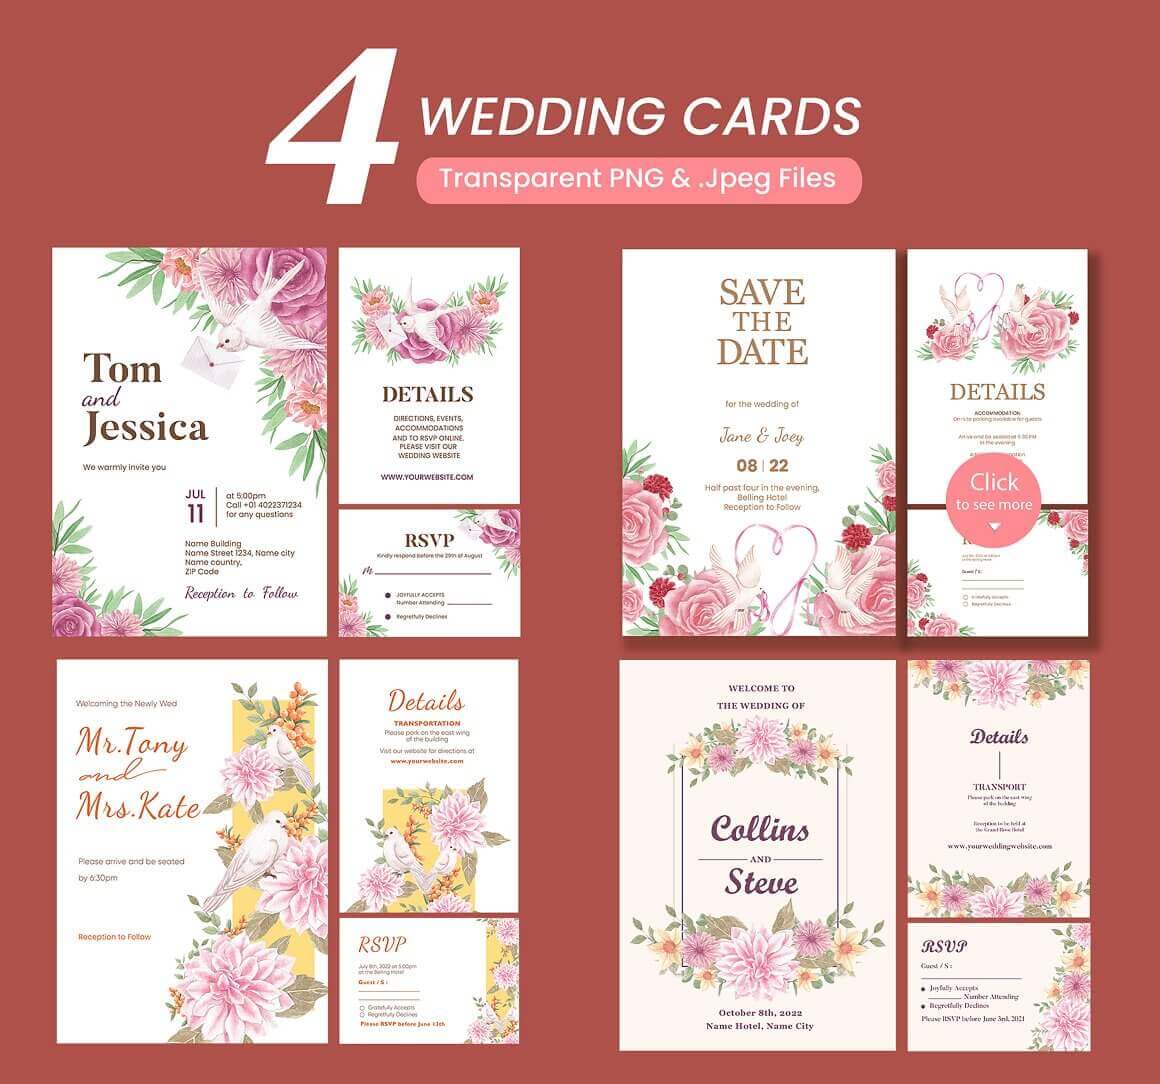 4 Wedding Cards with Different Types of Design.